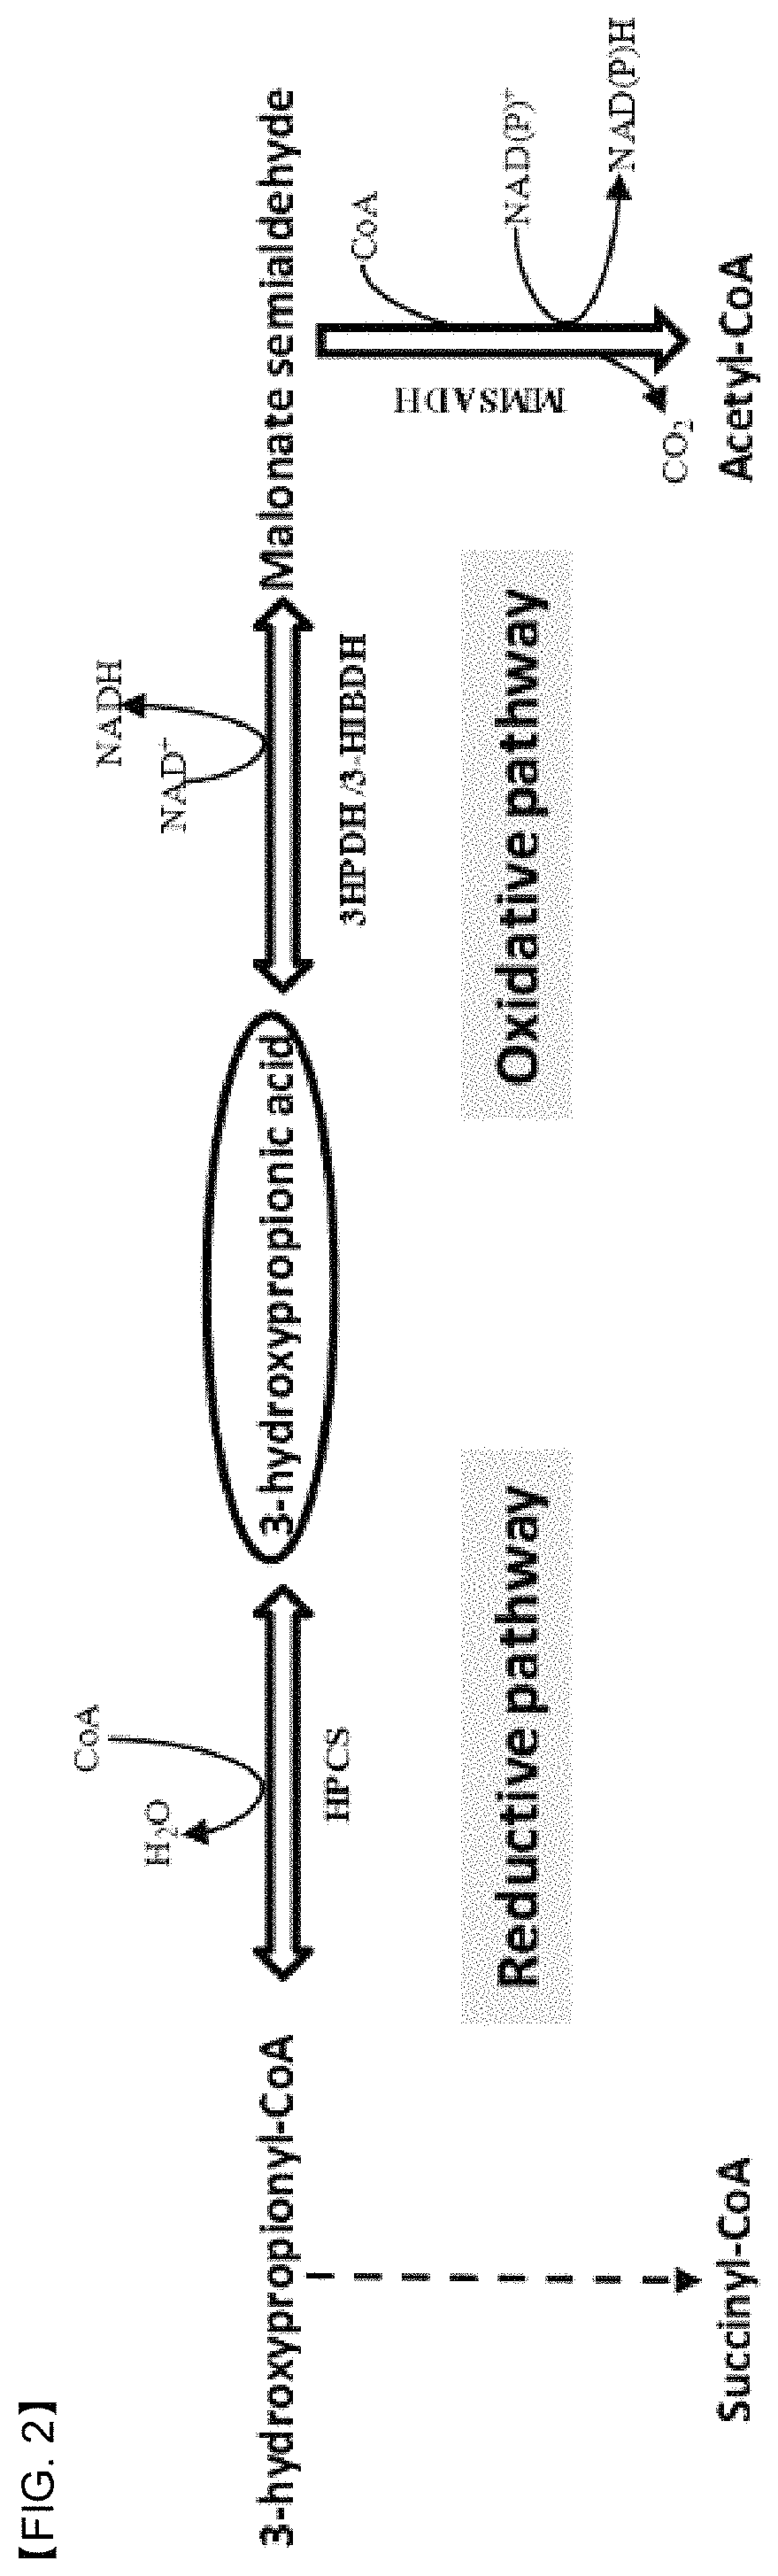 Promoter system inducing expression by 3-hydroxypropionic acid and method for biological production of 3-hydroxypropionic acid using same